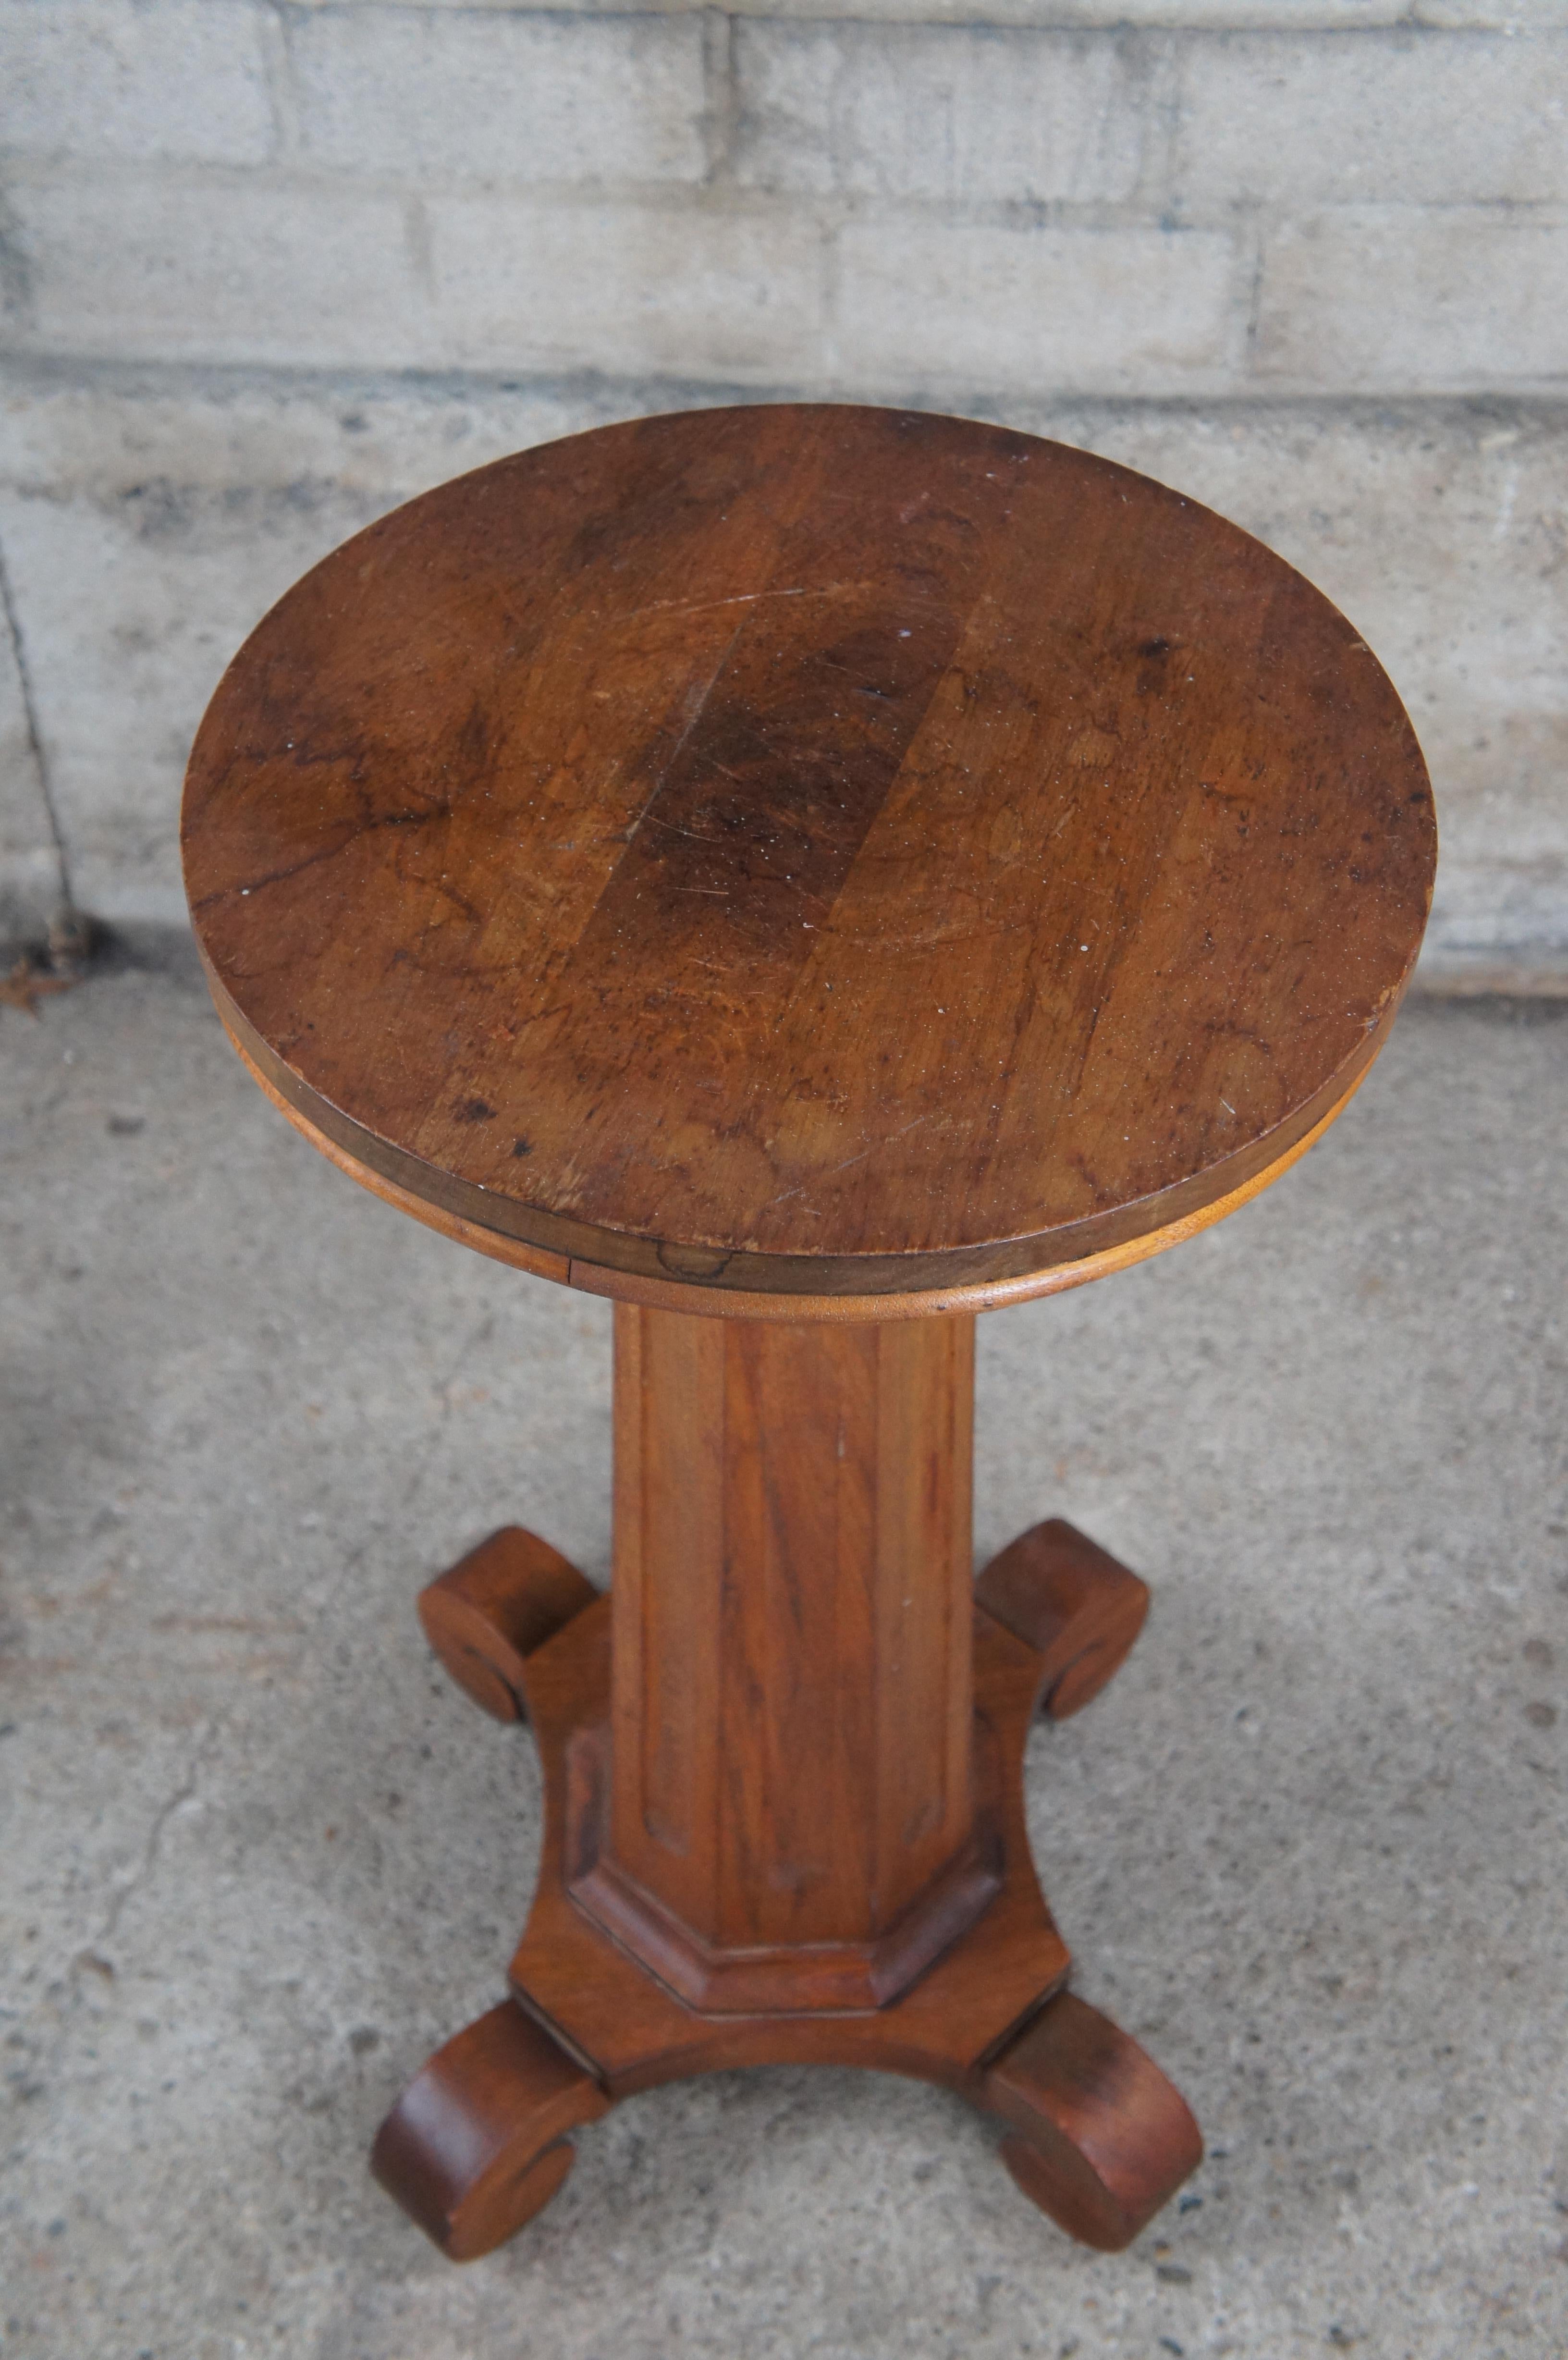 Antique American Classical Empire Mahogany Pedestal Table Sculpture Plant Stand In Good Condition For Sale In Dayton, OH